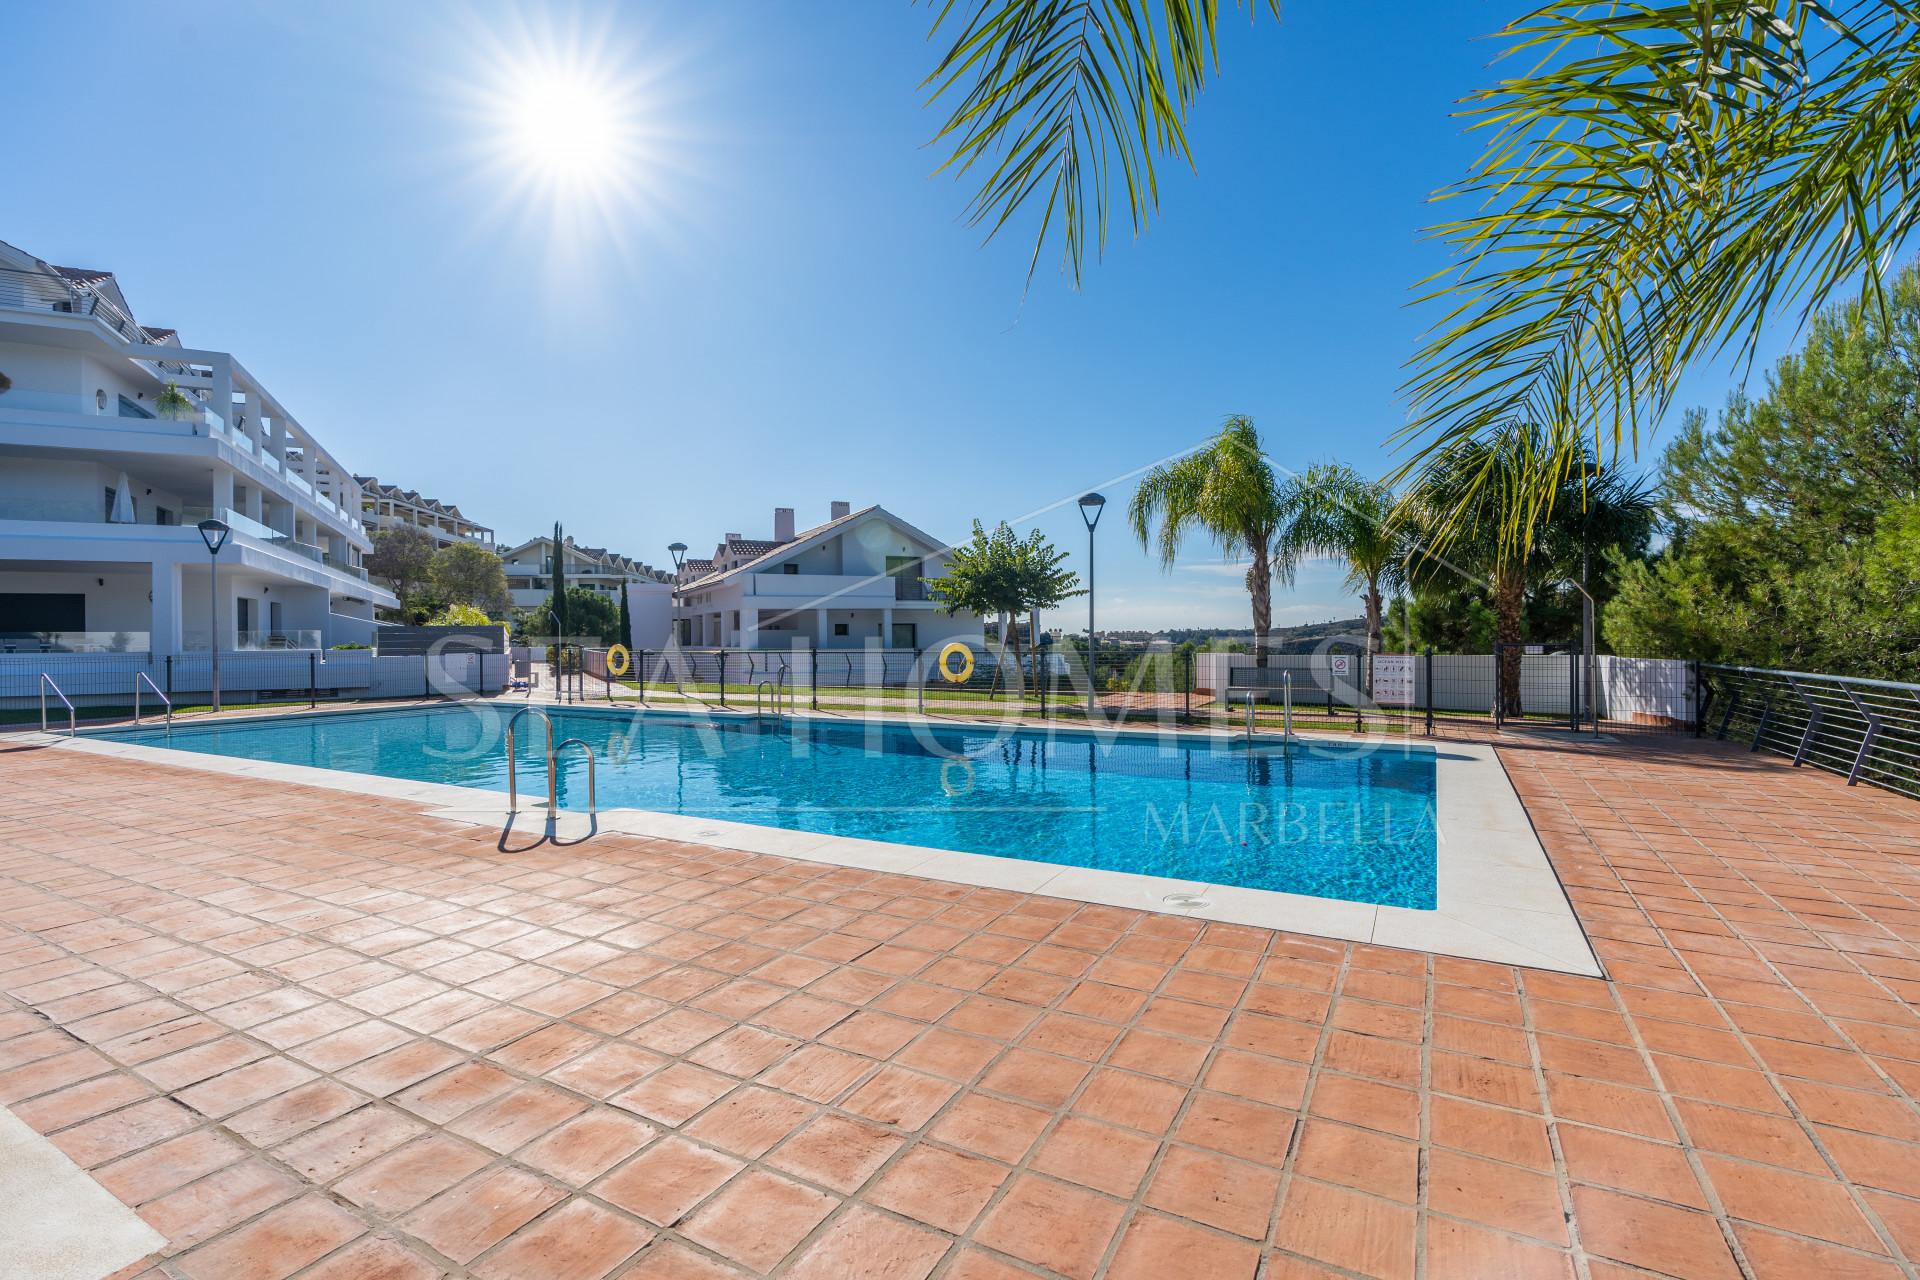 Stunning 2 bed Duplex Penthouse in Selwo, Estepona